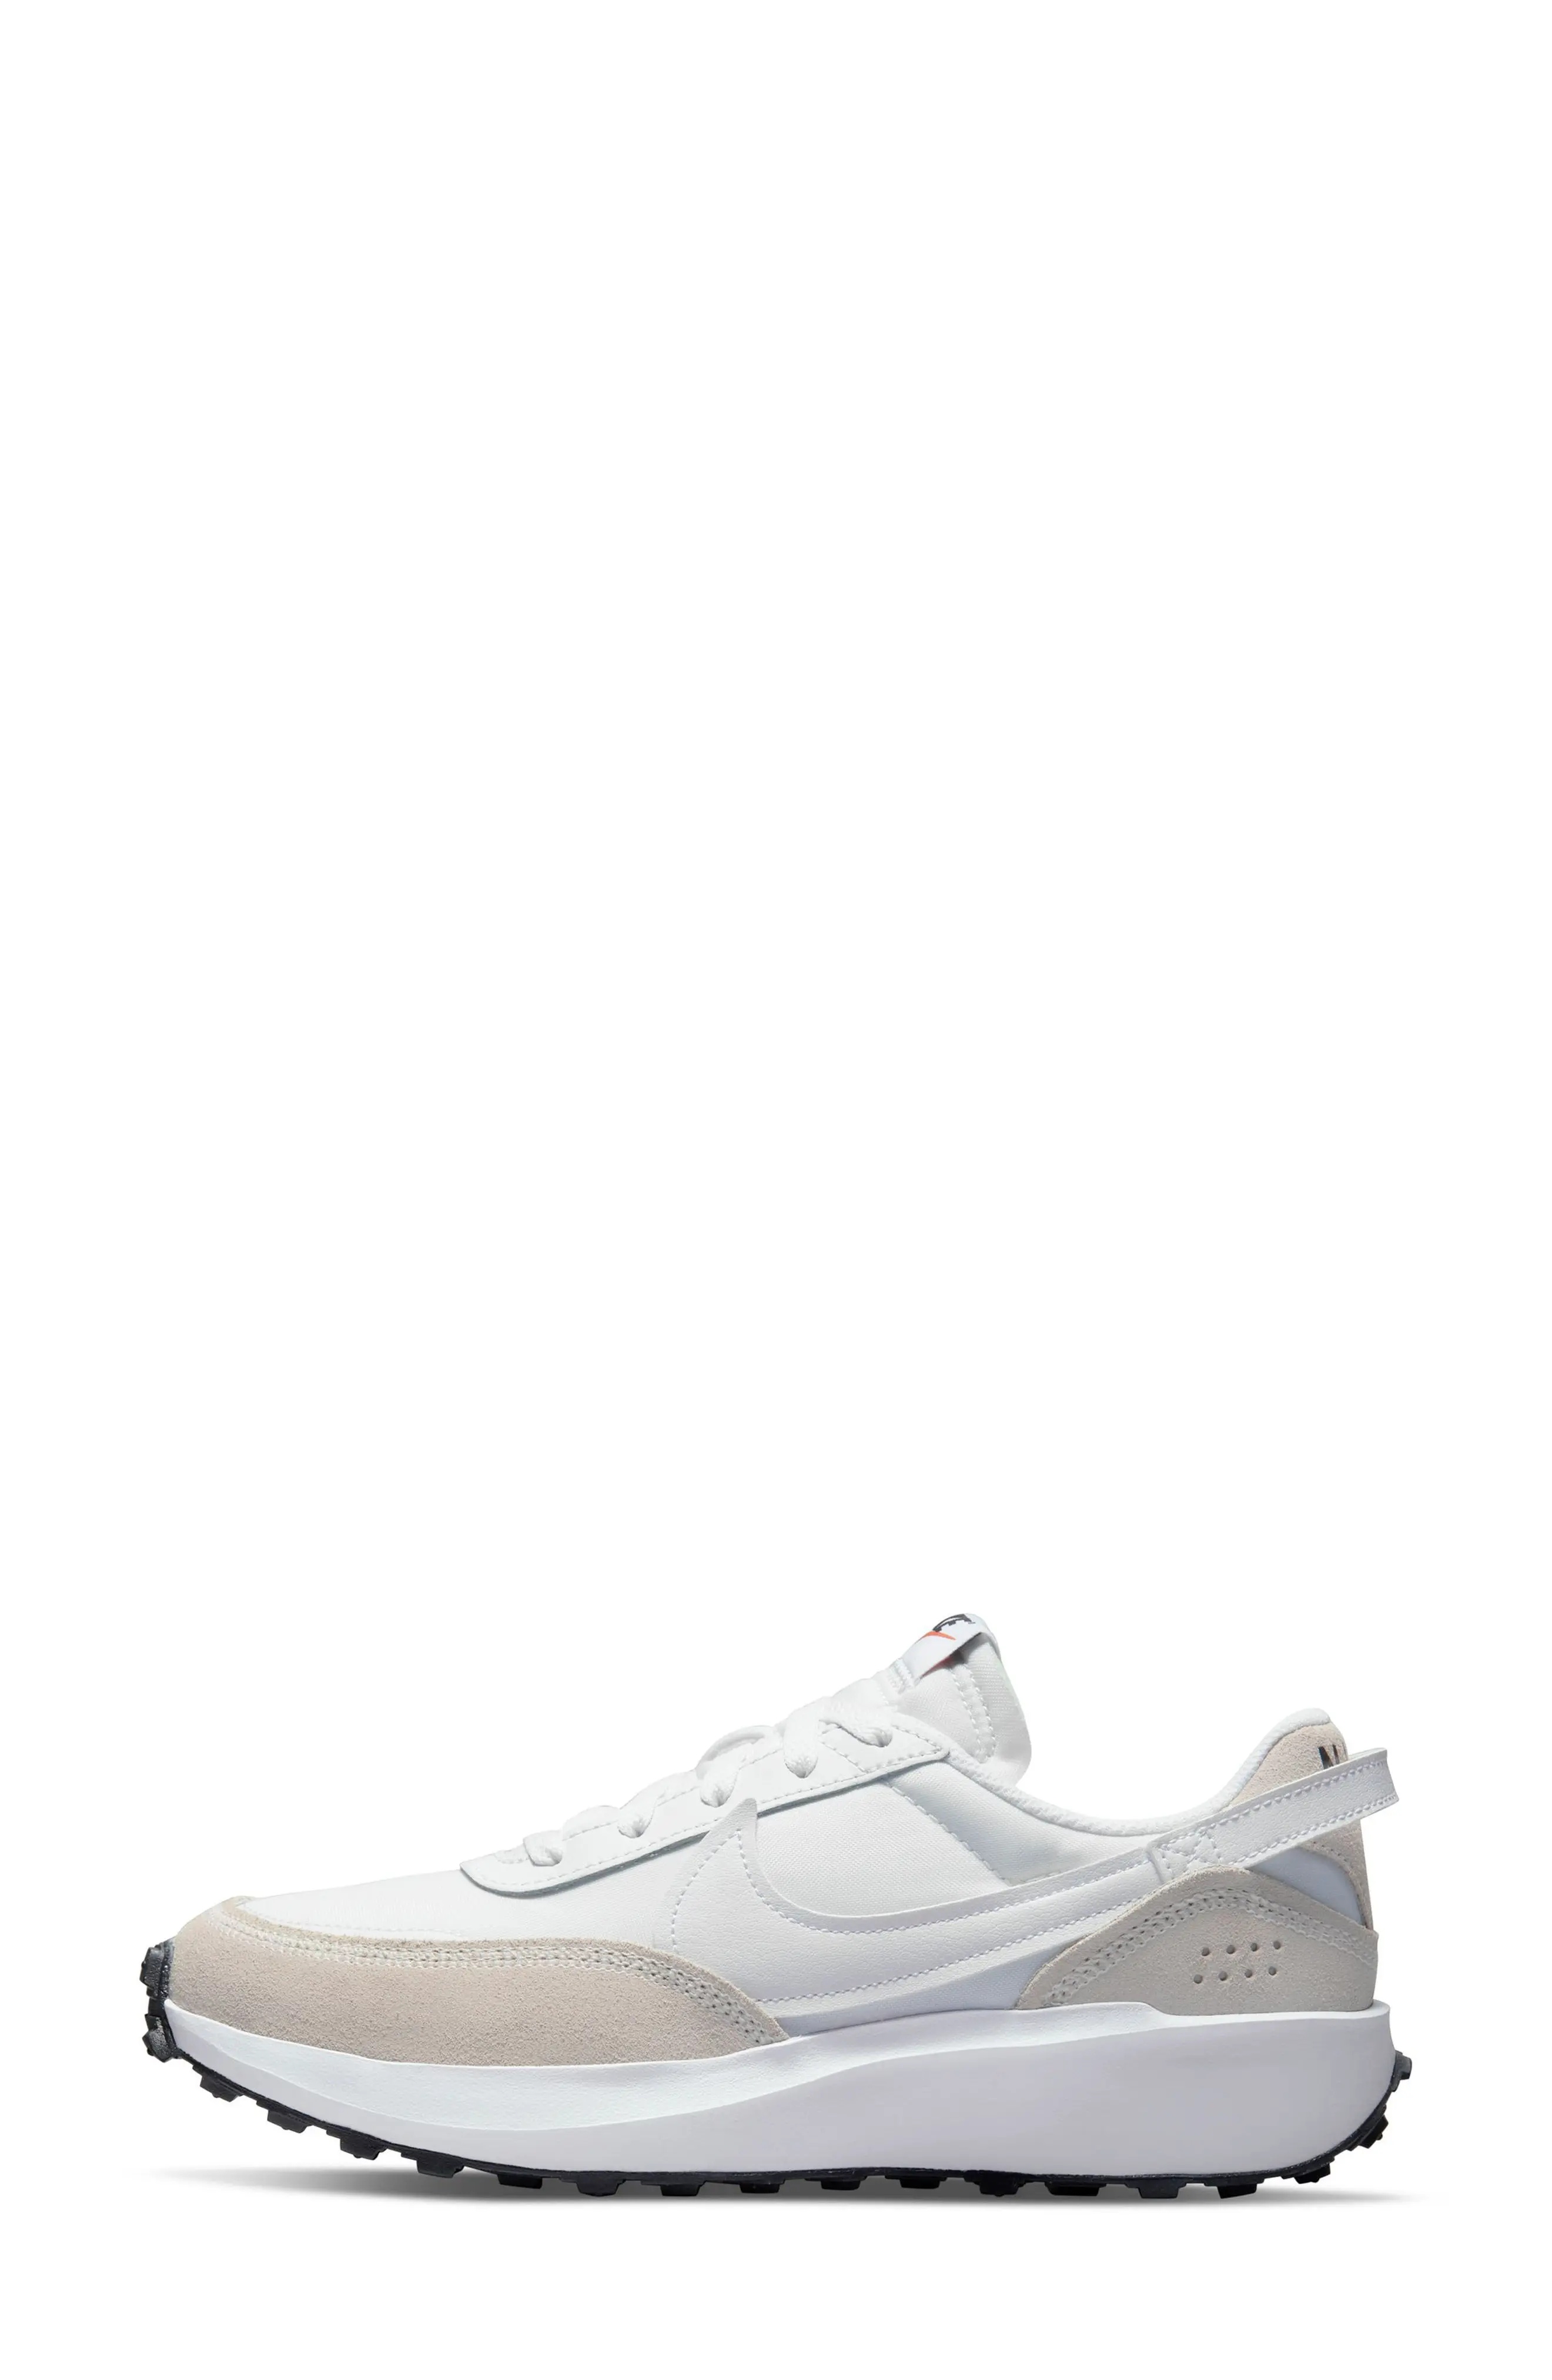 Waffle Debut Sneaker in White/White - 7